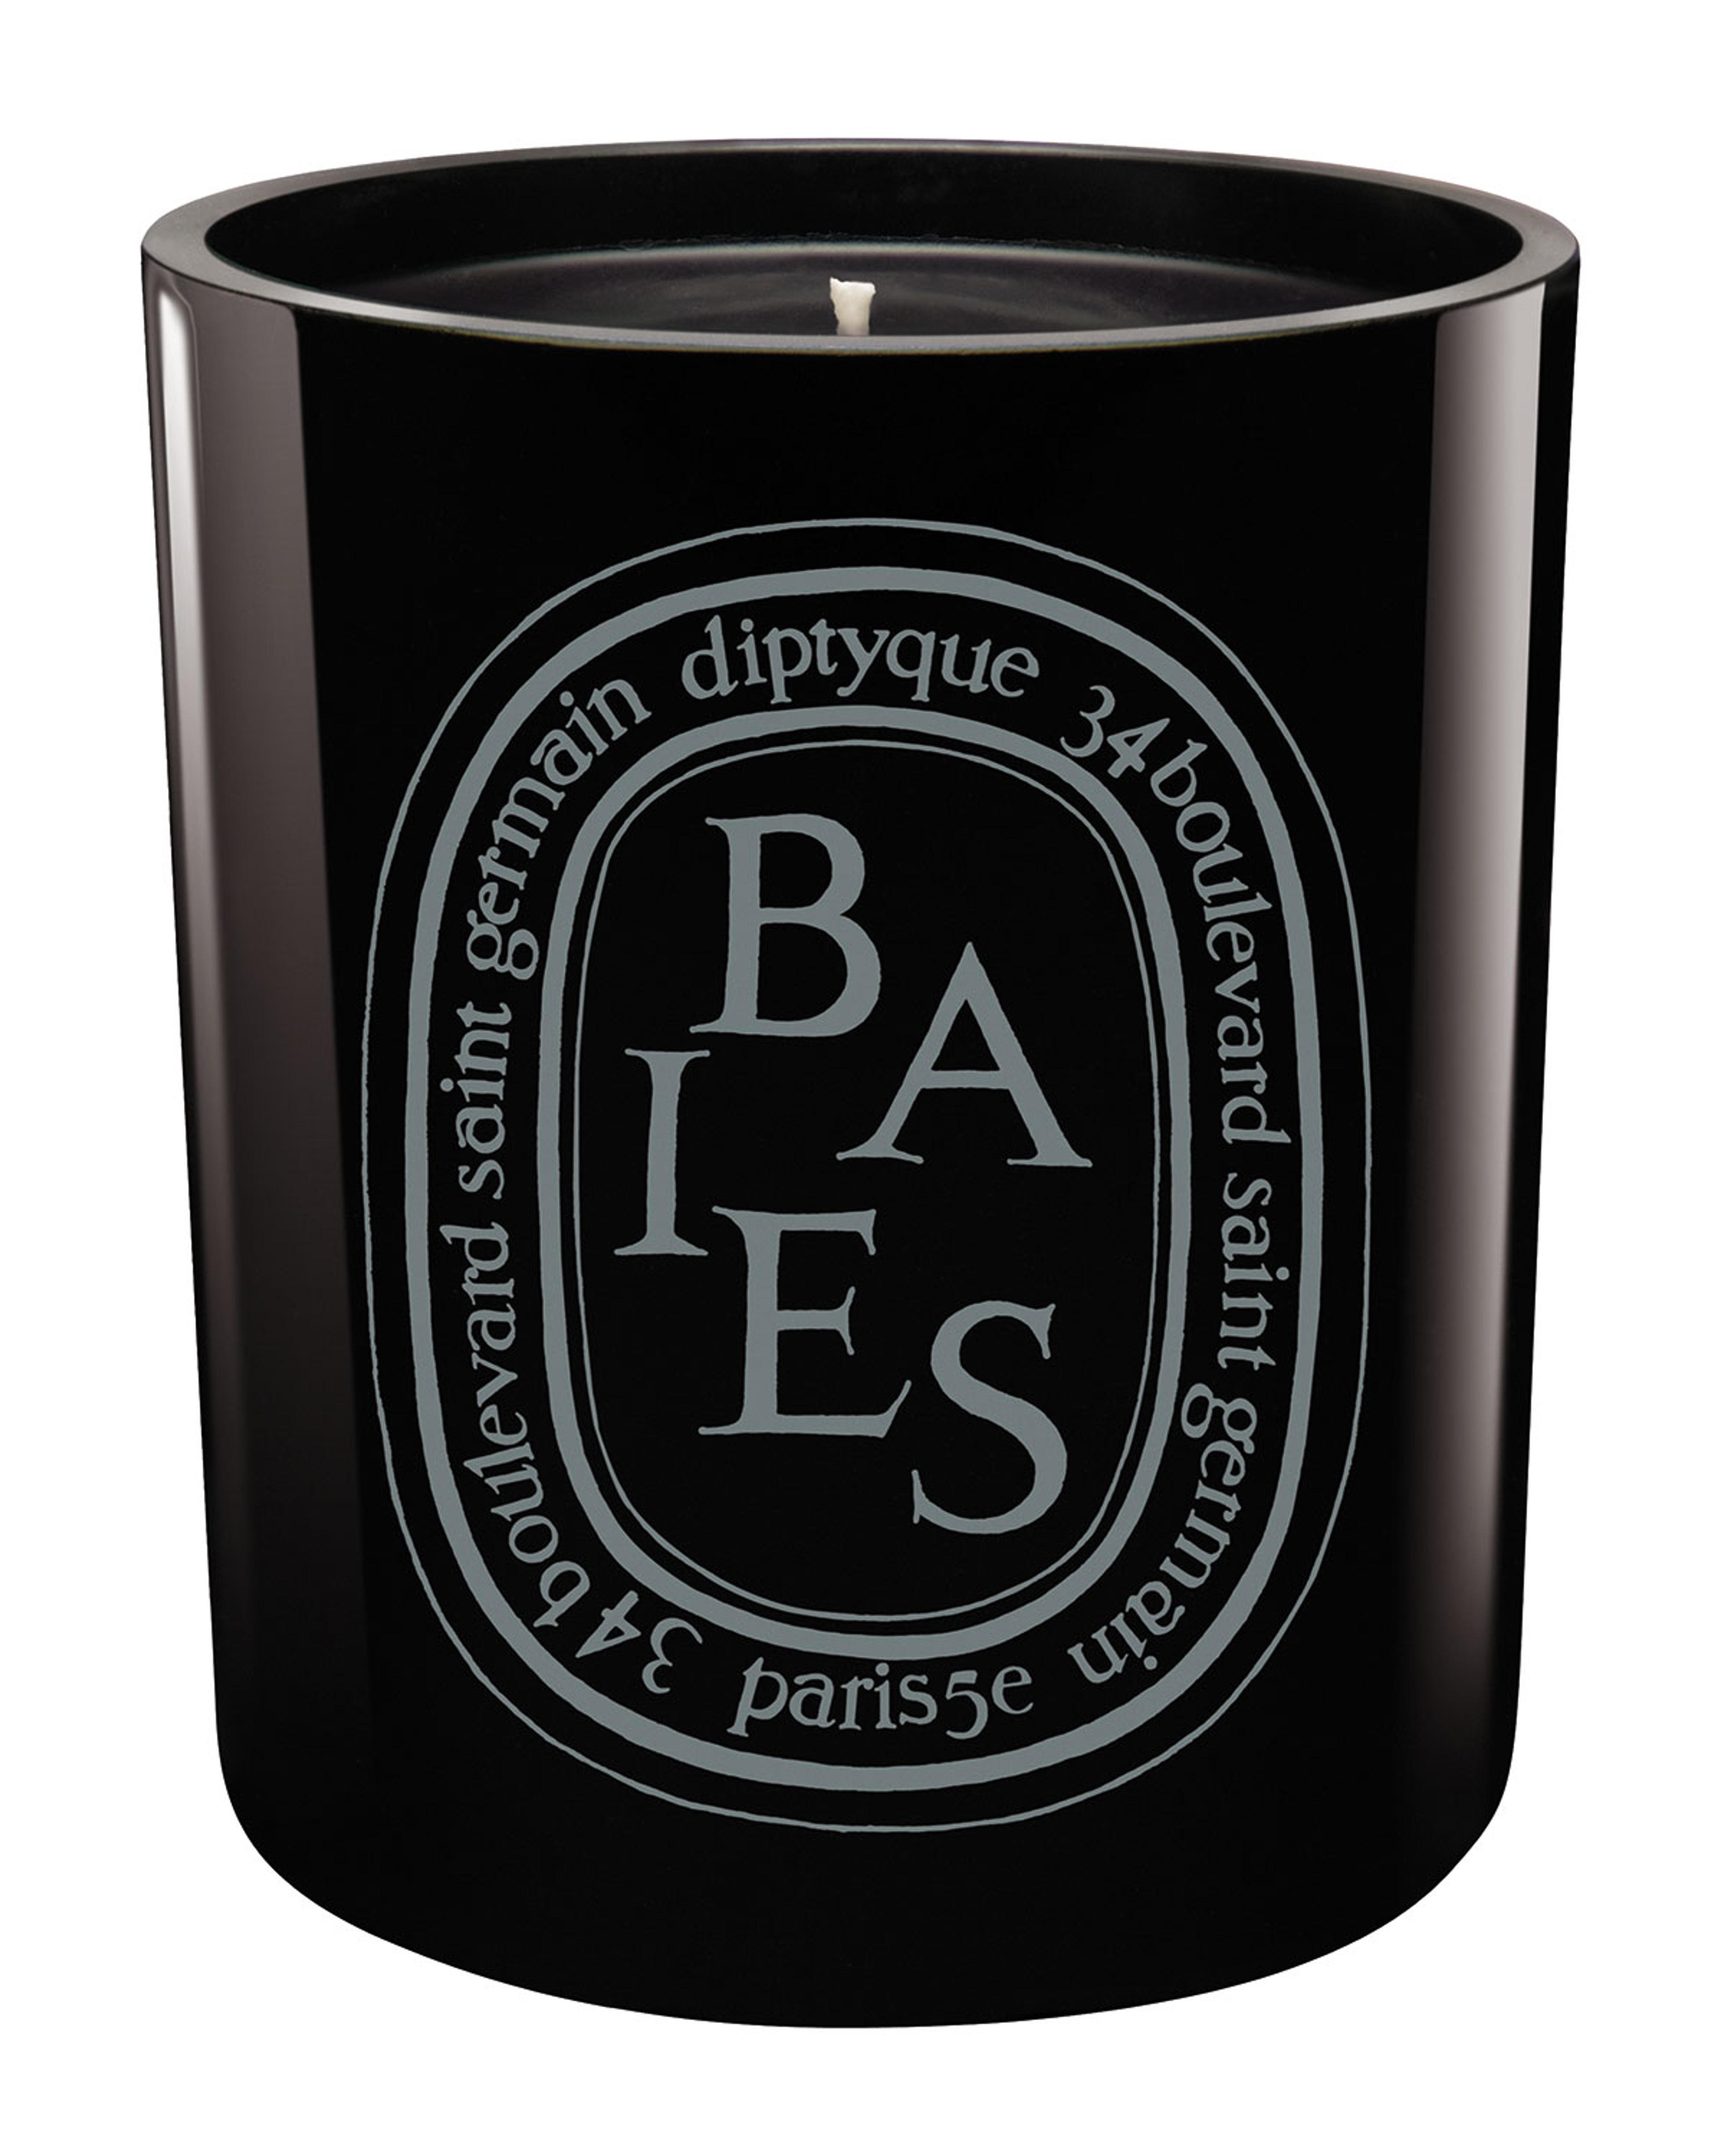 Diptyque 10.2 oz. Black Baies Scented Candle | Neiman Marcus